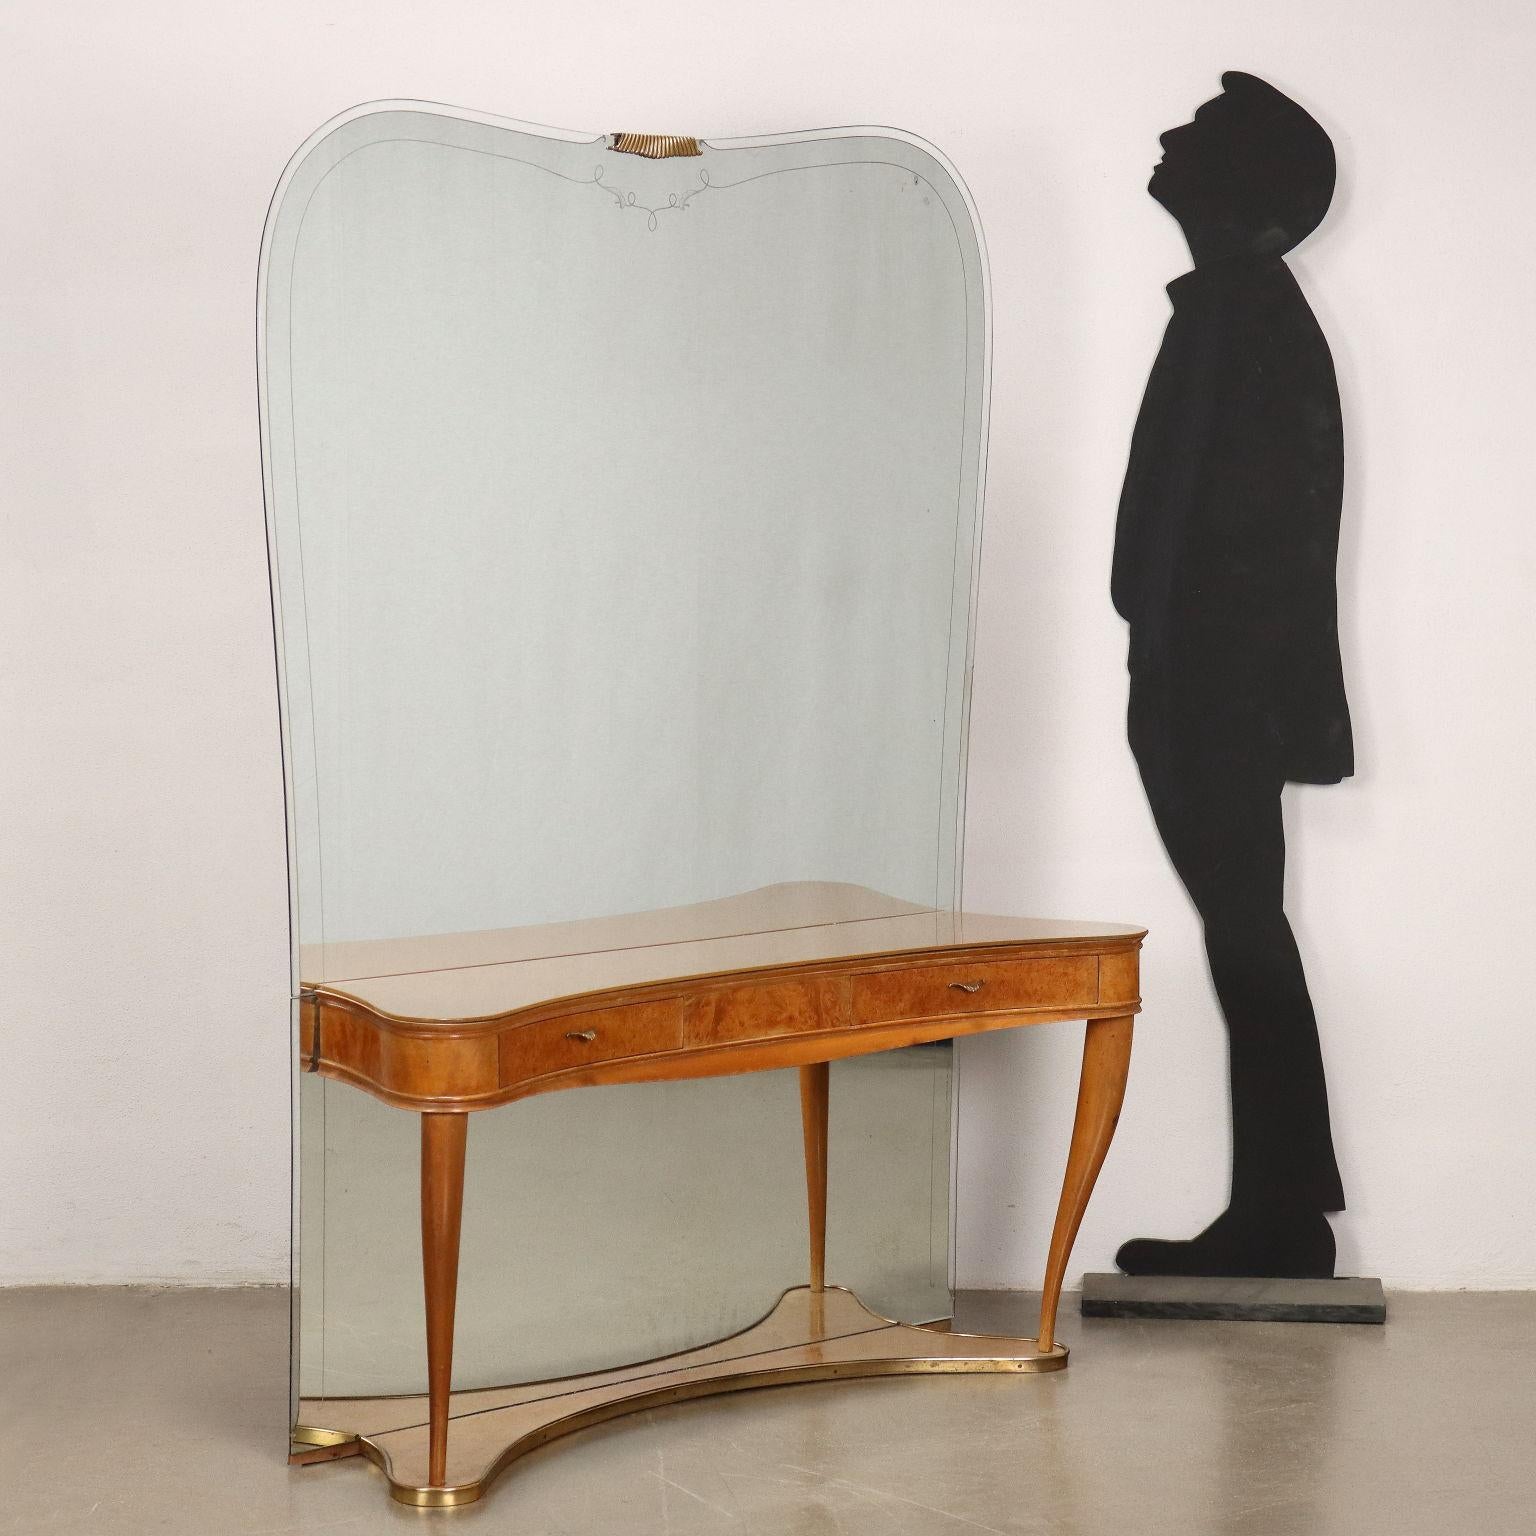 Vanity Table with mirror in briarwood veneer with back-treated glass and brass.